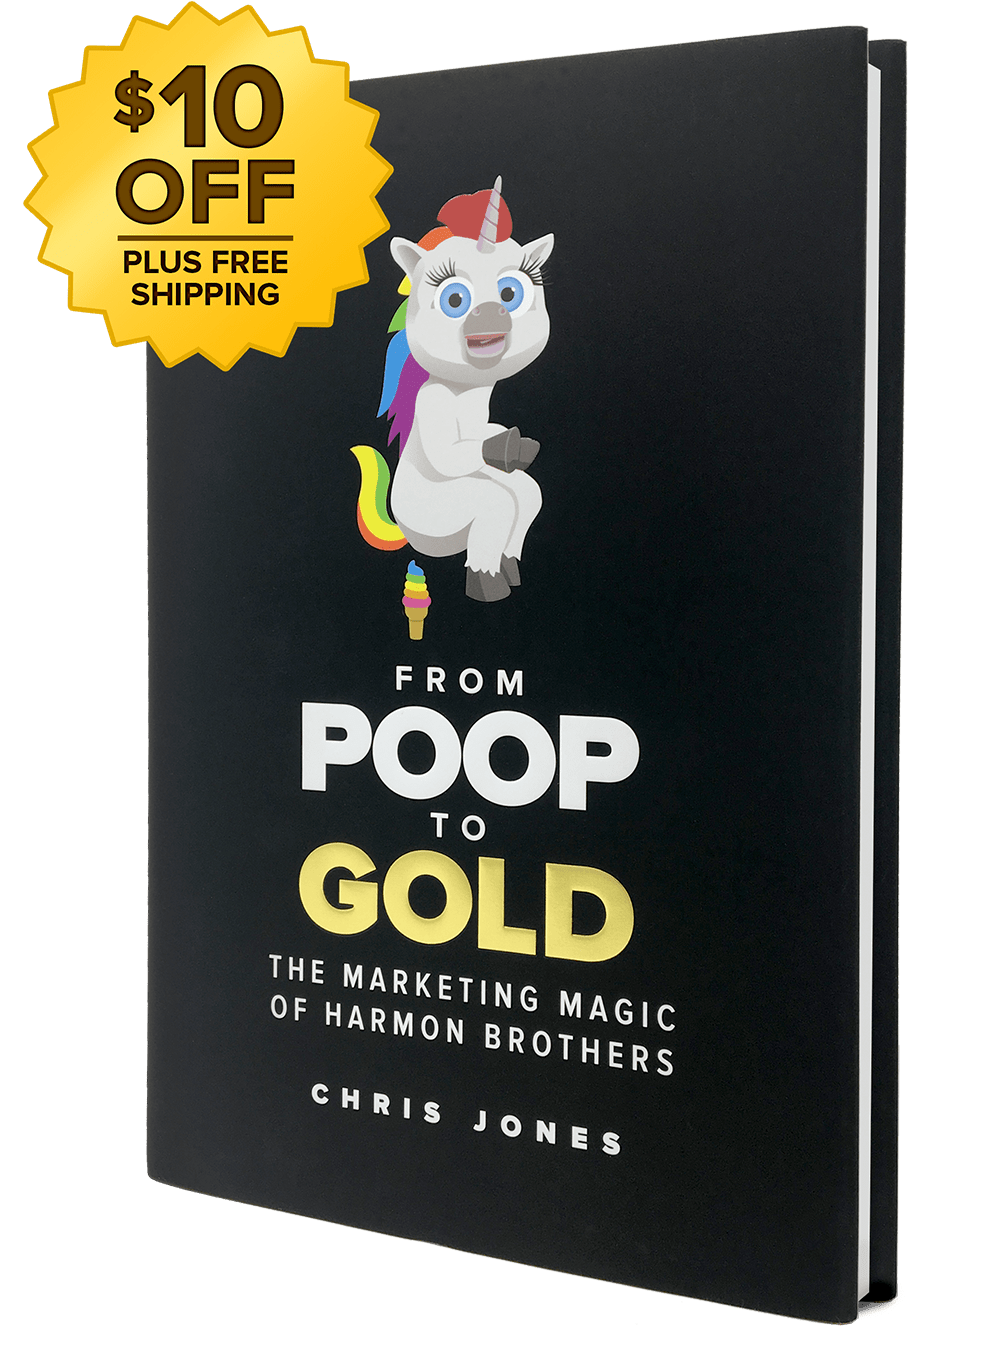 From Poop to Gold Book Deal